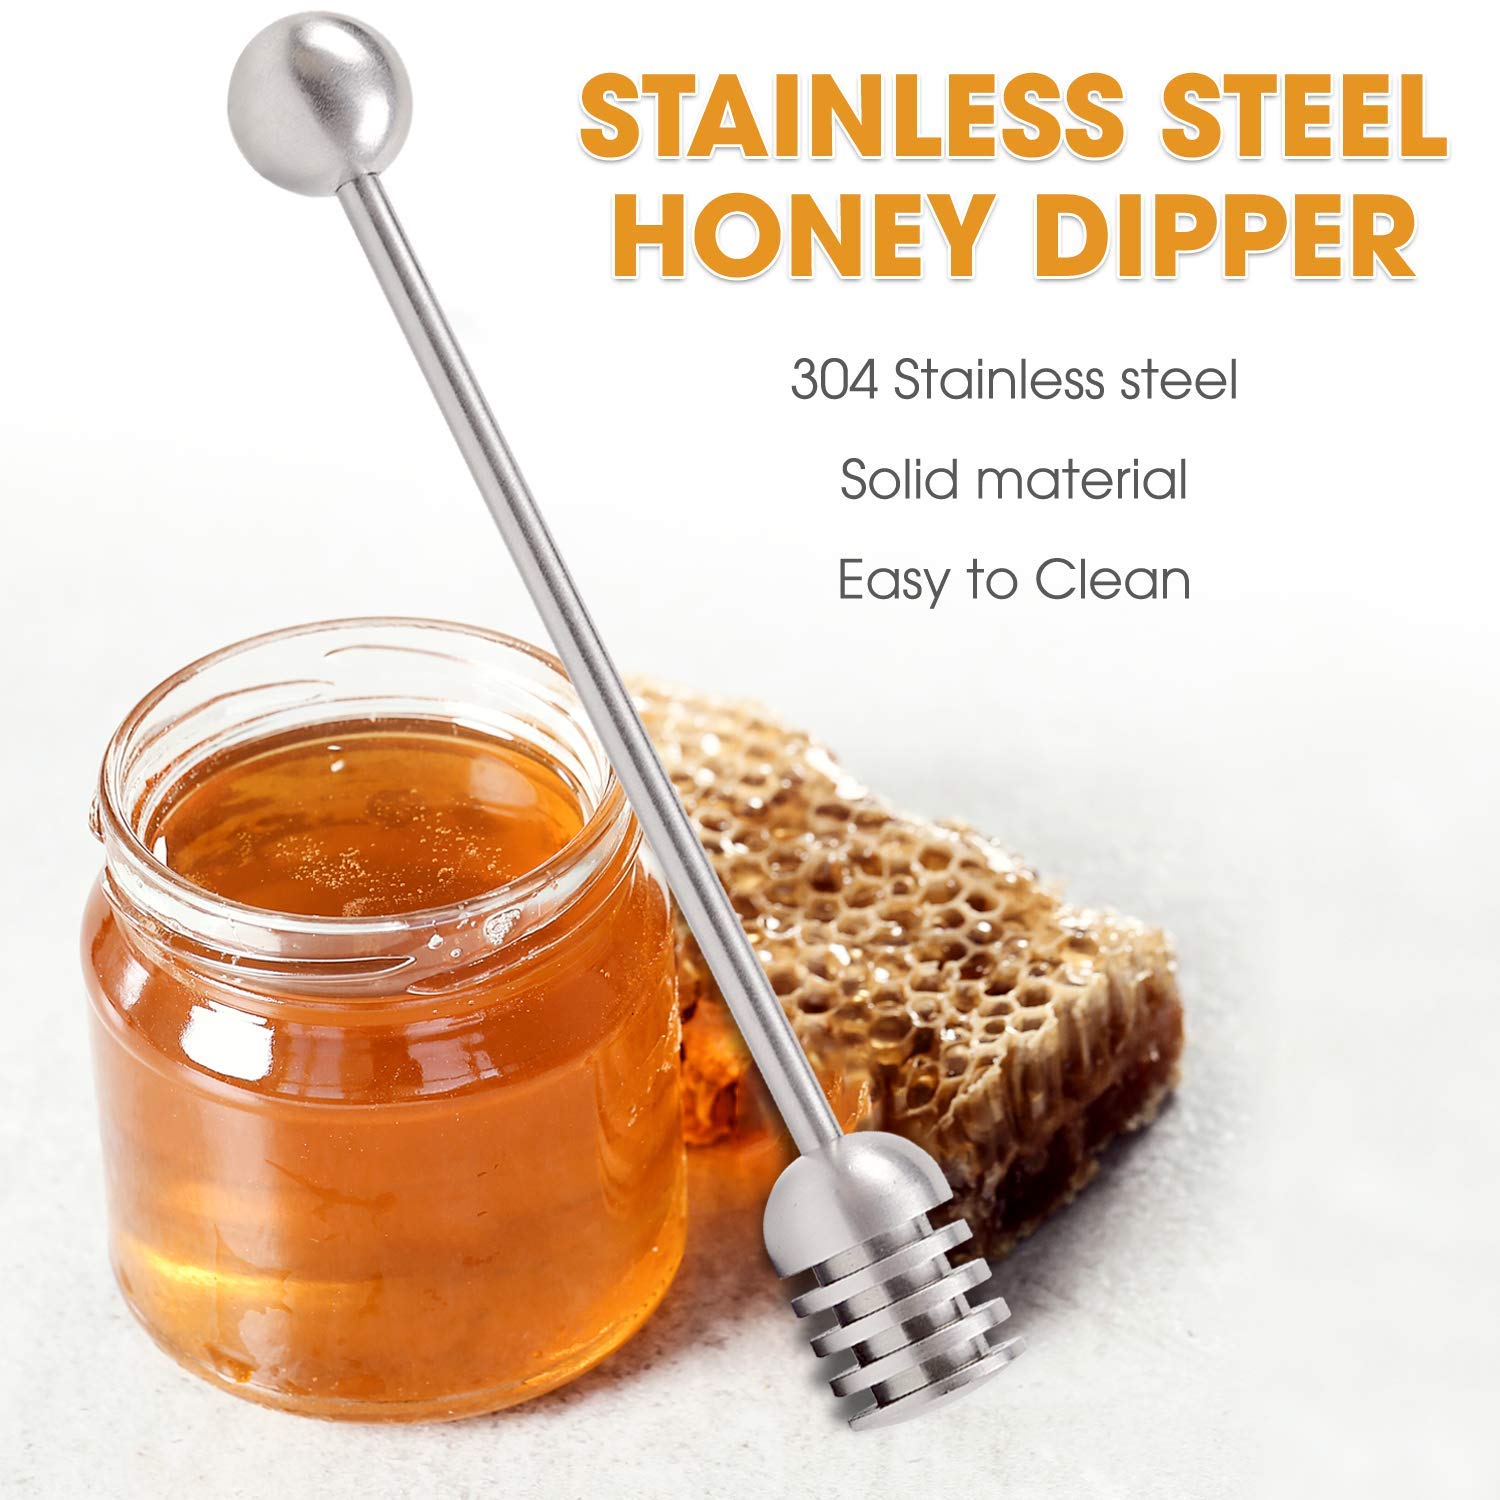 DUGATO Honey and Syrup Dippers, 2pcs 6.3 Inch 304 Stainless Steel Honeycomb Stick Spoon Stirrer Server for Honey Pot Jar Containers (Silver)